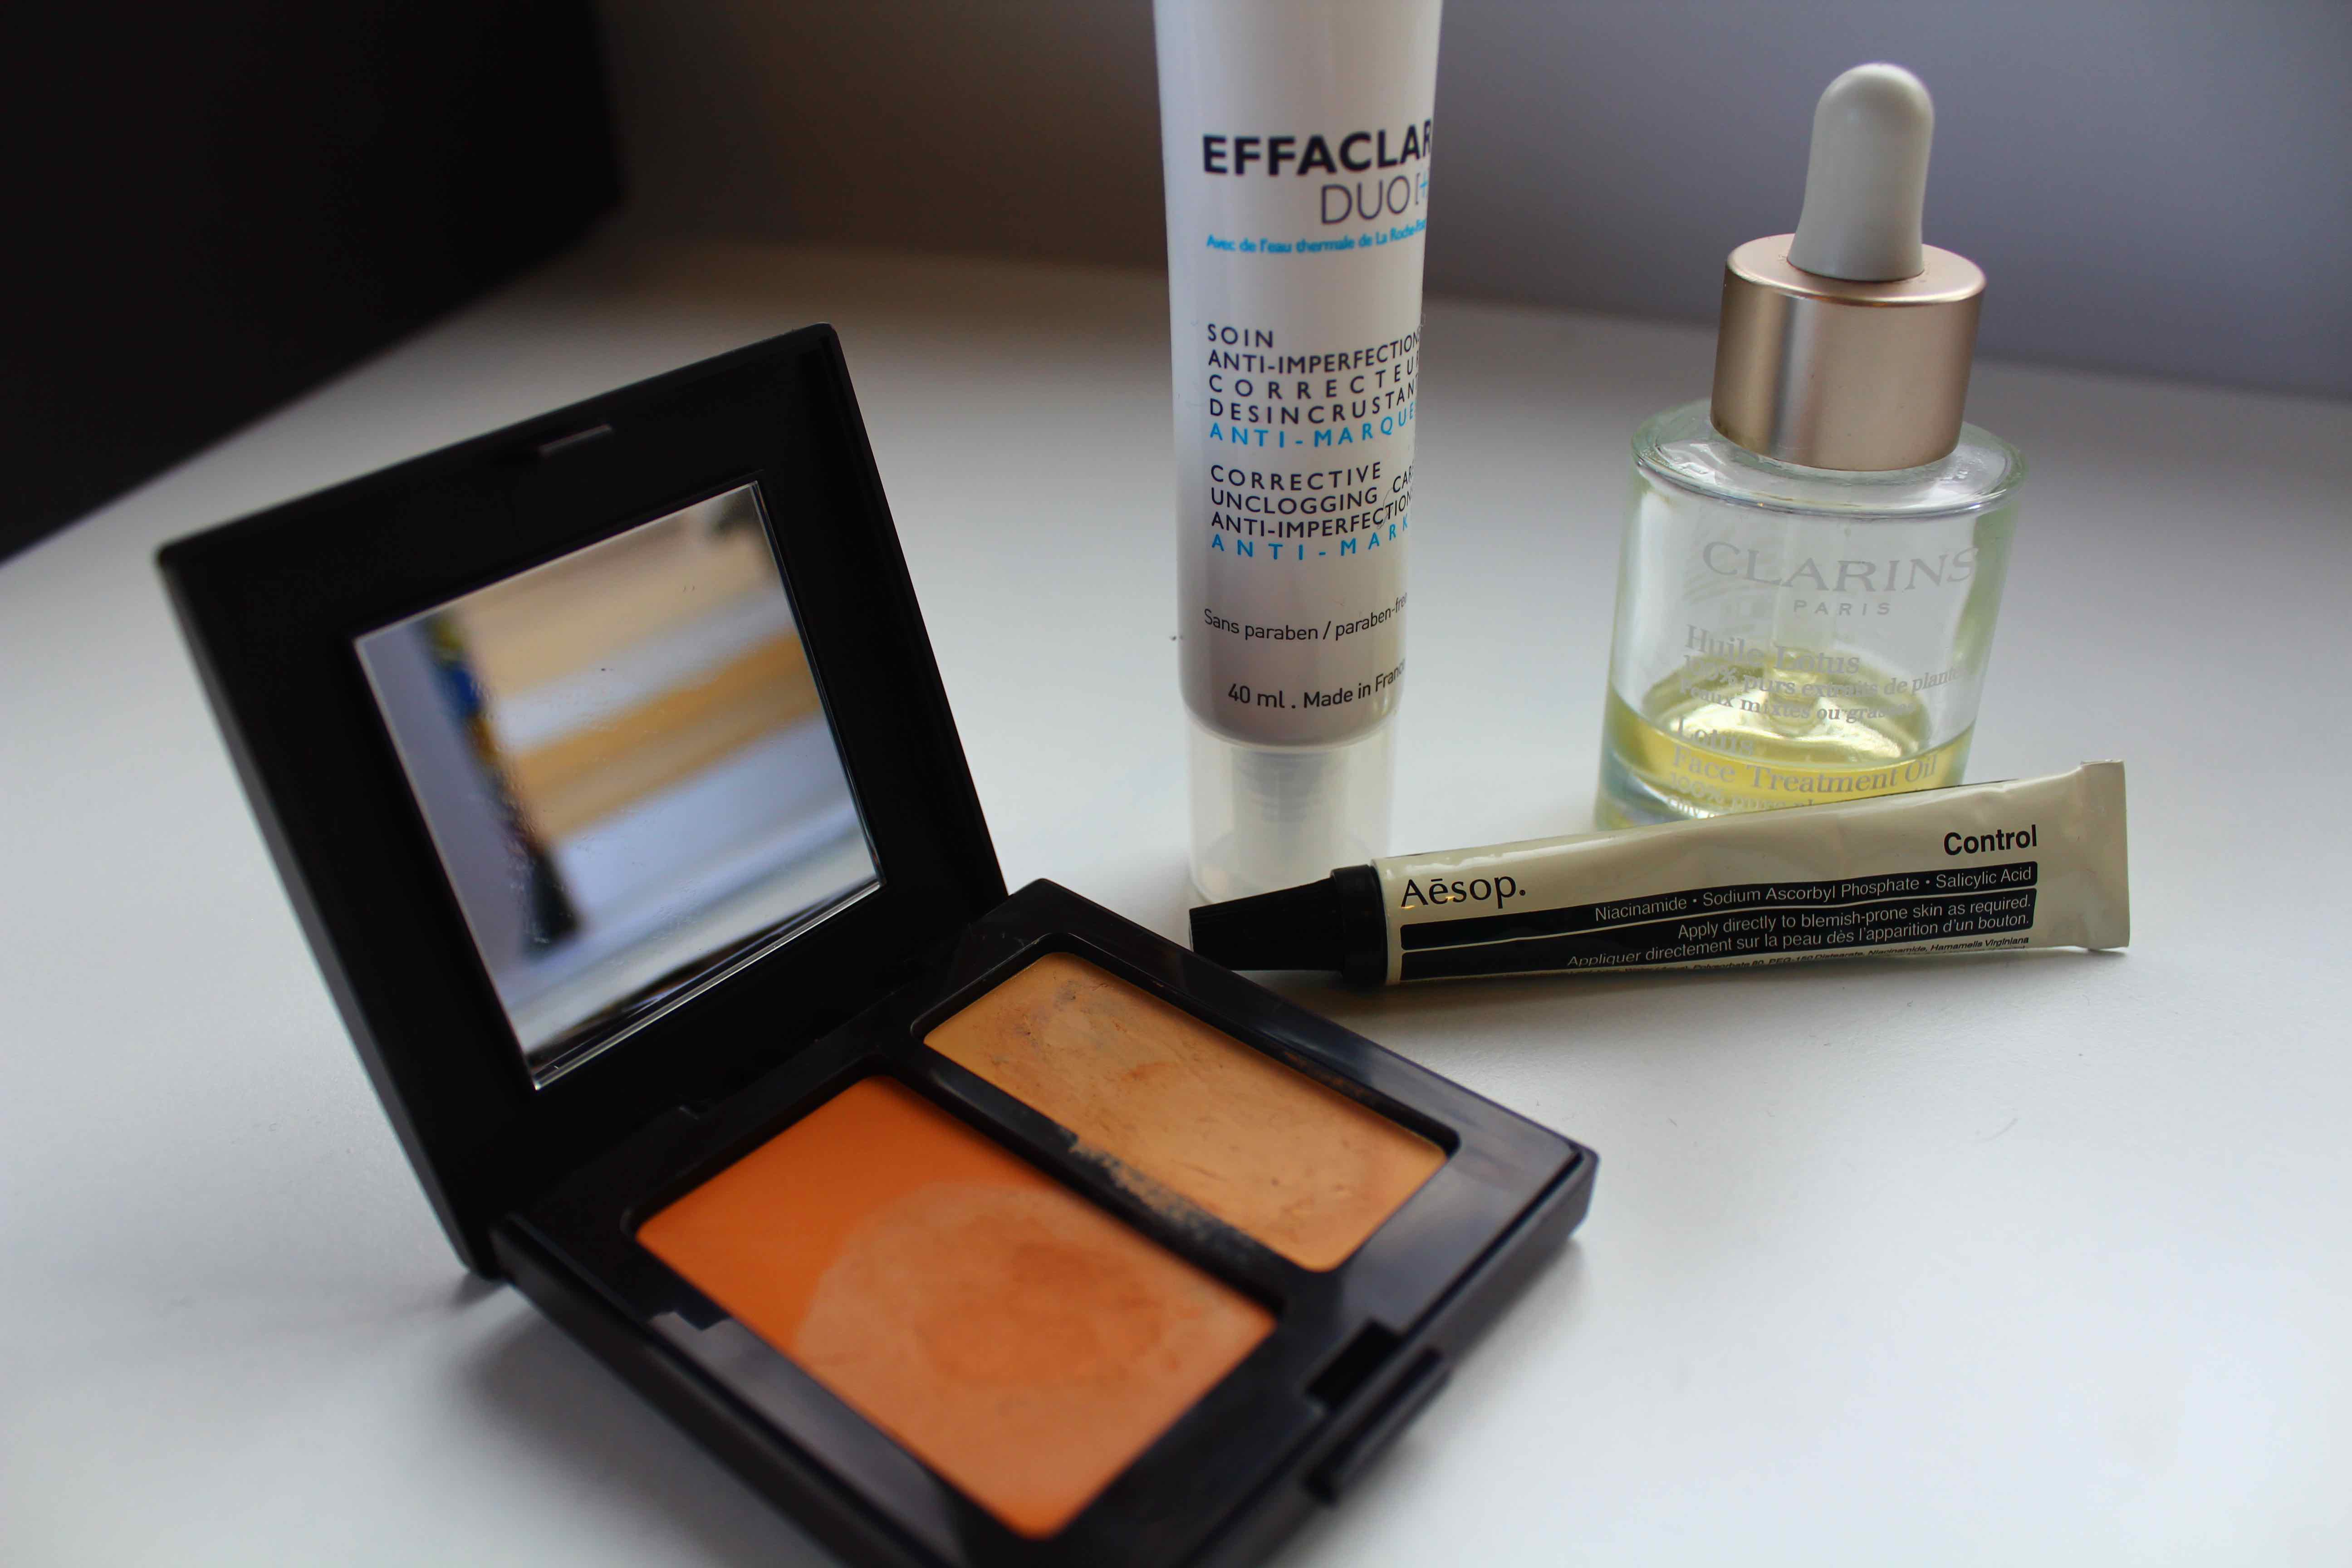 How to treat spots and blemishes overnight and how to conceal them by facemadeup/face made up